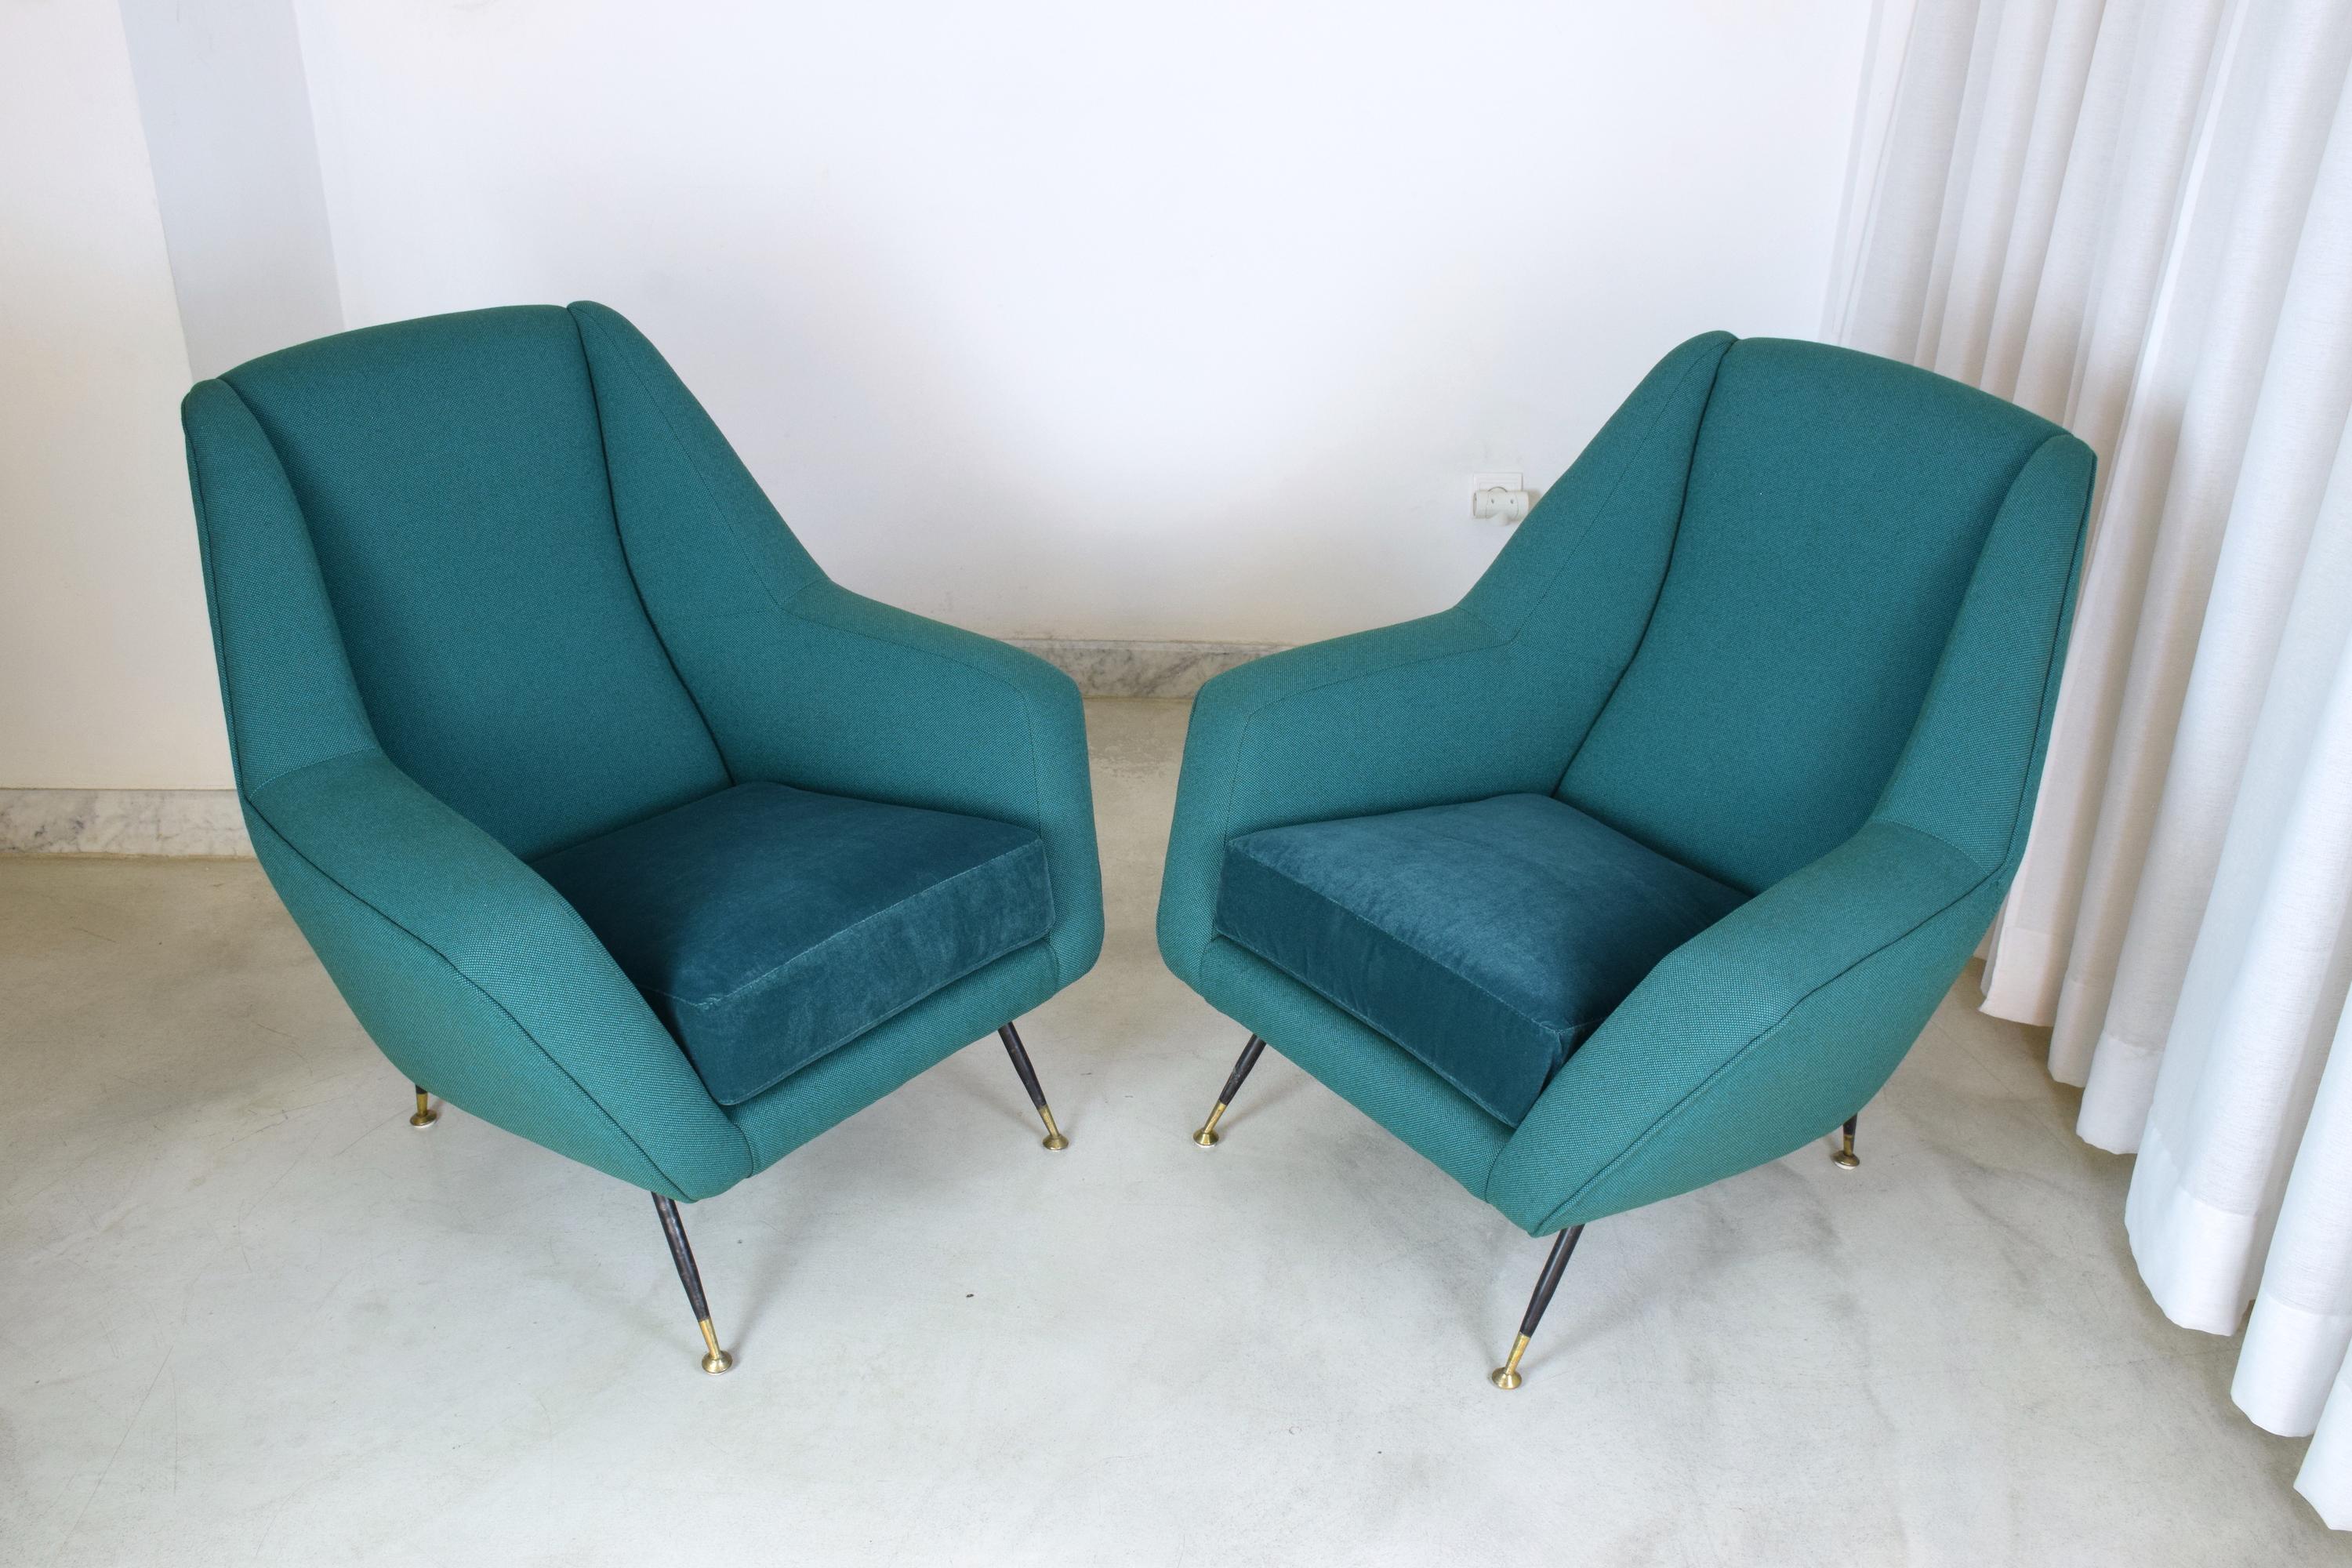 A set of two 20th century vintage lounge chairs attributed by Iconic Italian midcentury designer Gigi Radice. In fully restored condition in a blue-green upholstery with black lacquered feet and polished brass endings.

All our pieces are fully